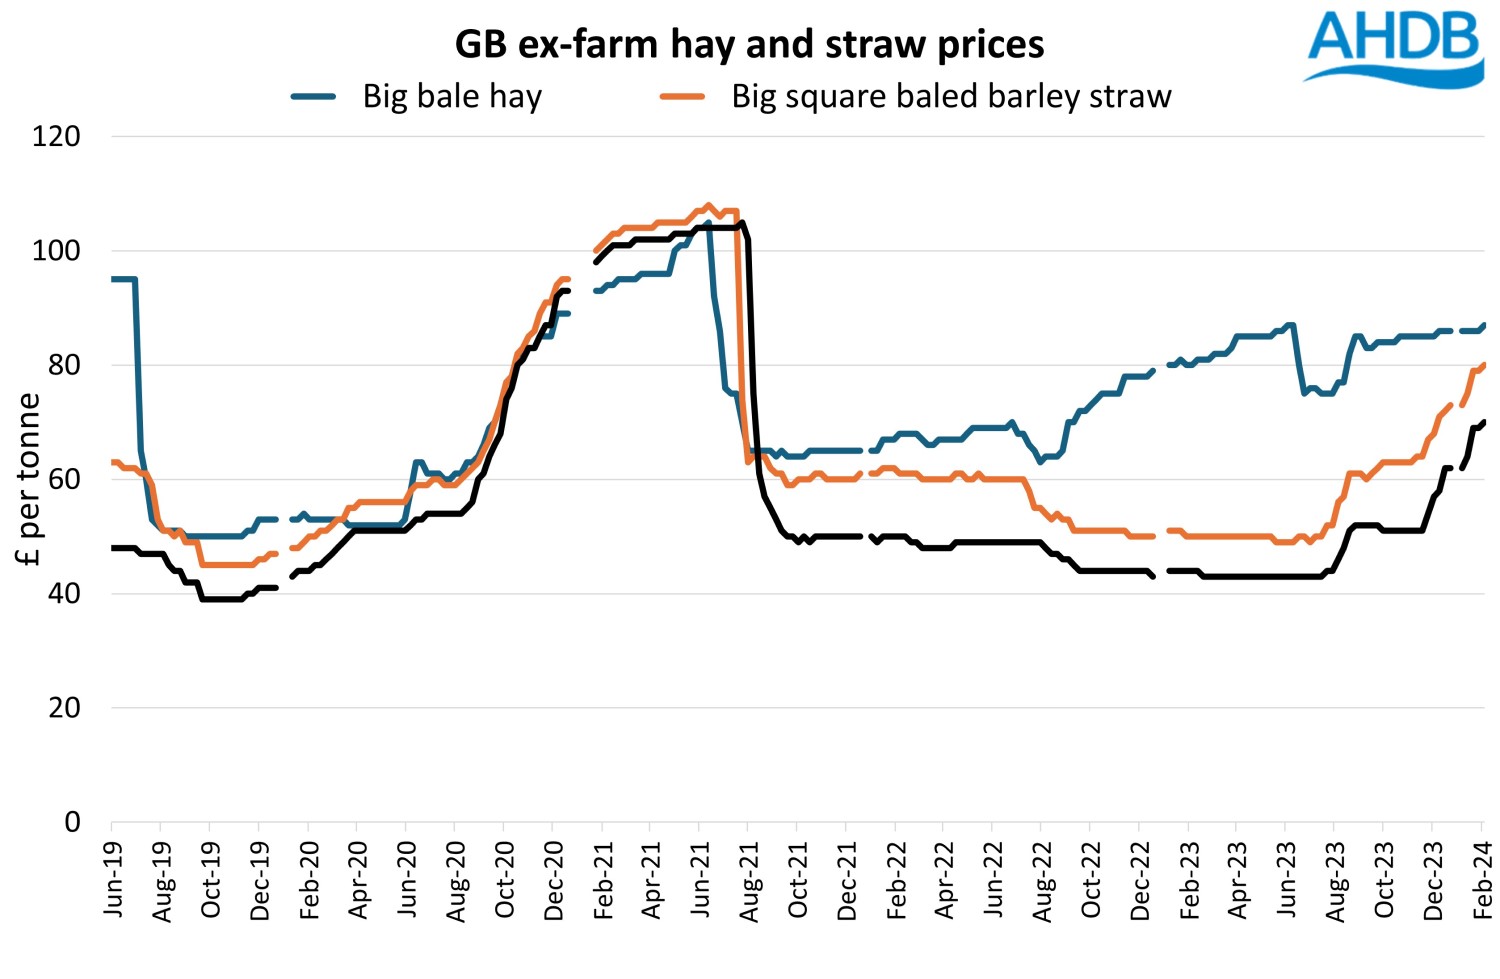 Graph showing GB ex-farm hay and straw prices